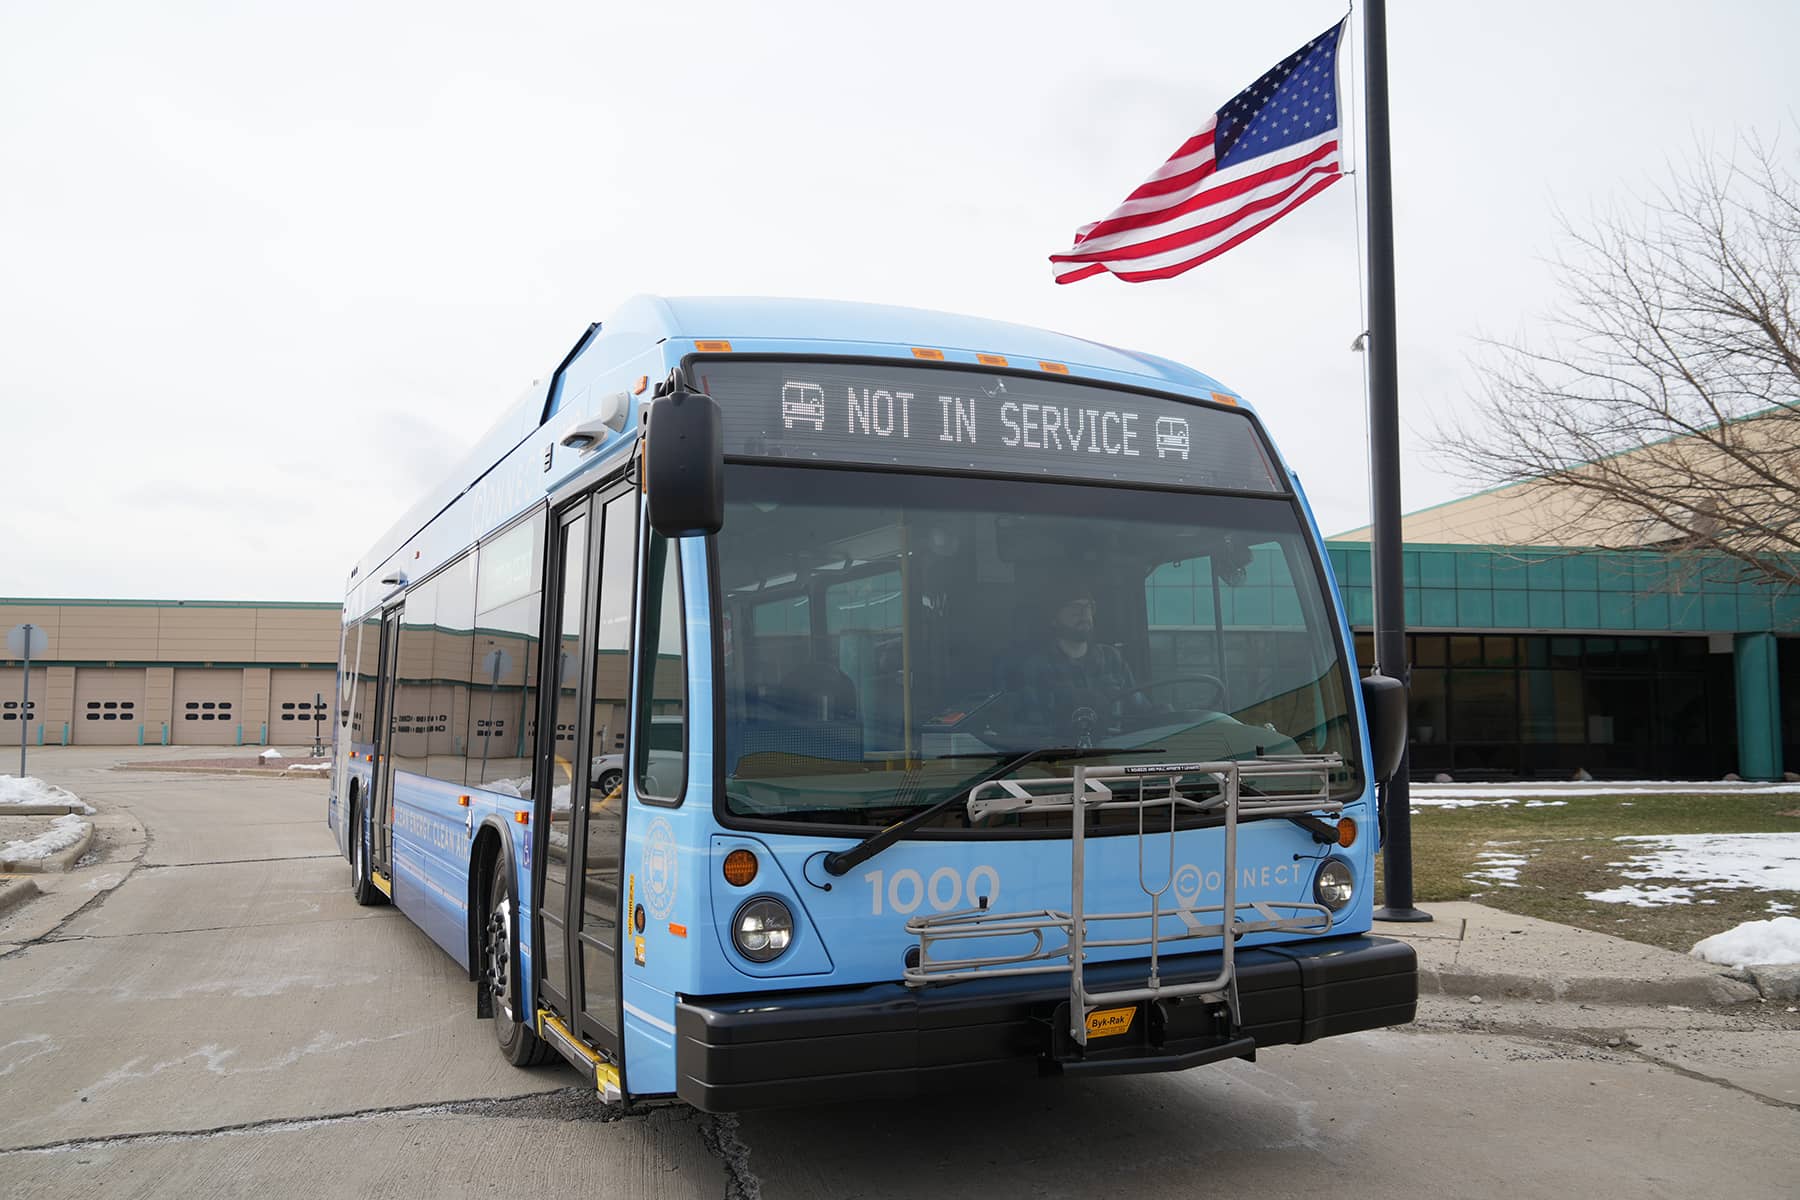 8-facts-about-transportation-and-infrastructure-in-wauwatosa-wisconsin